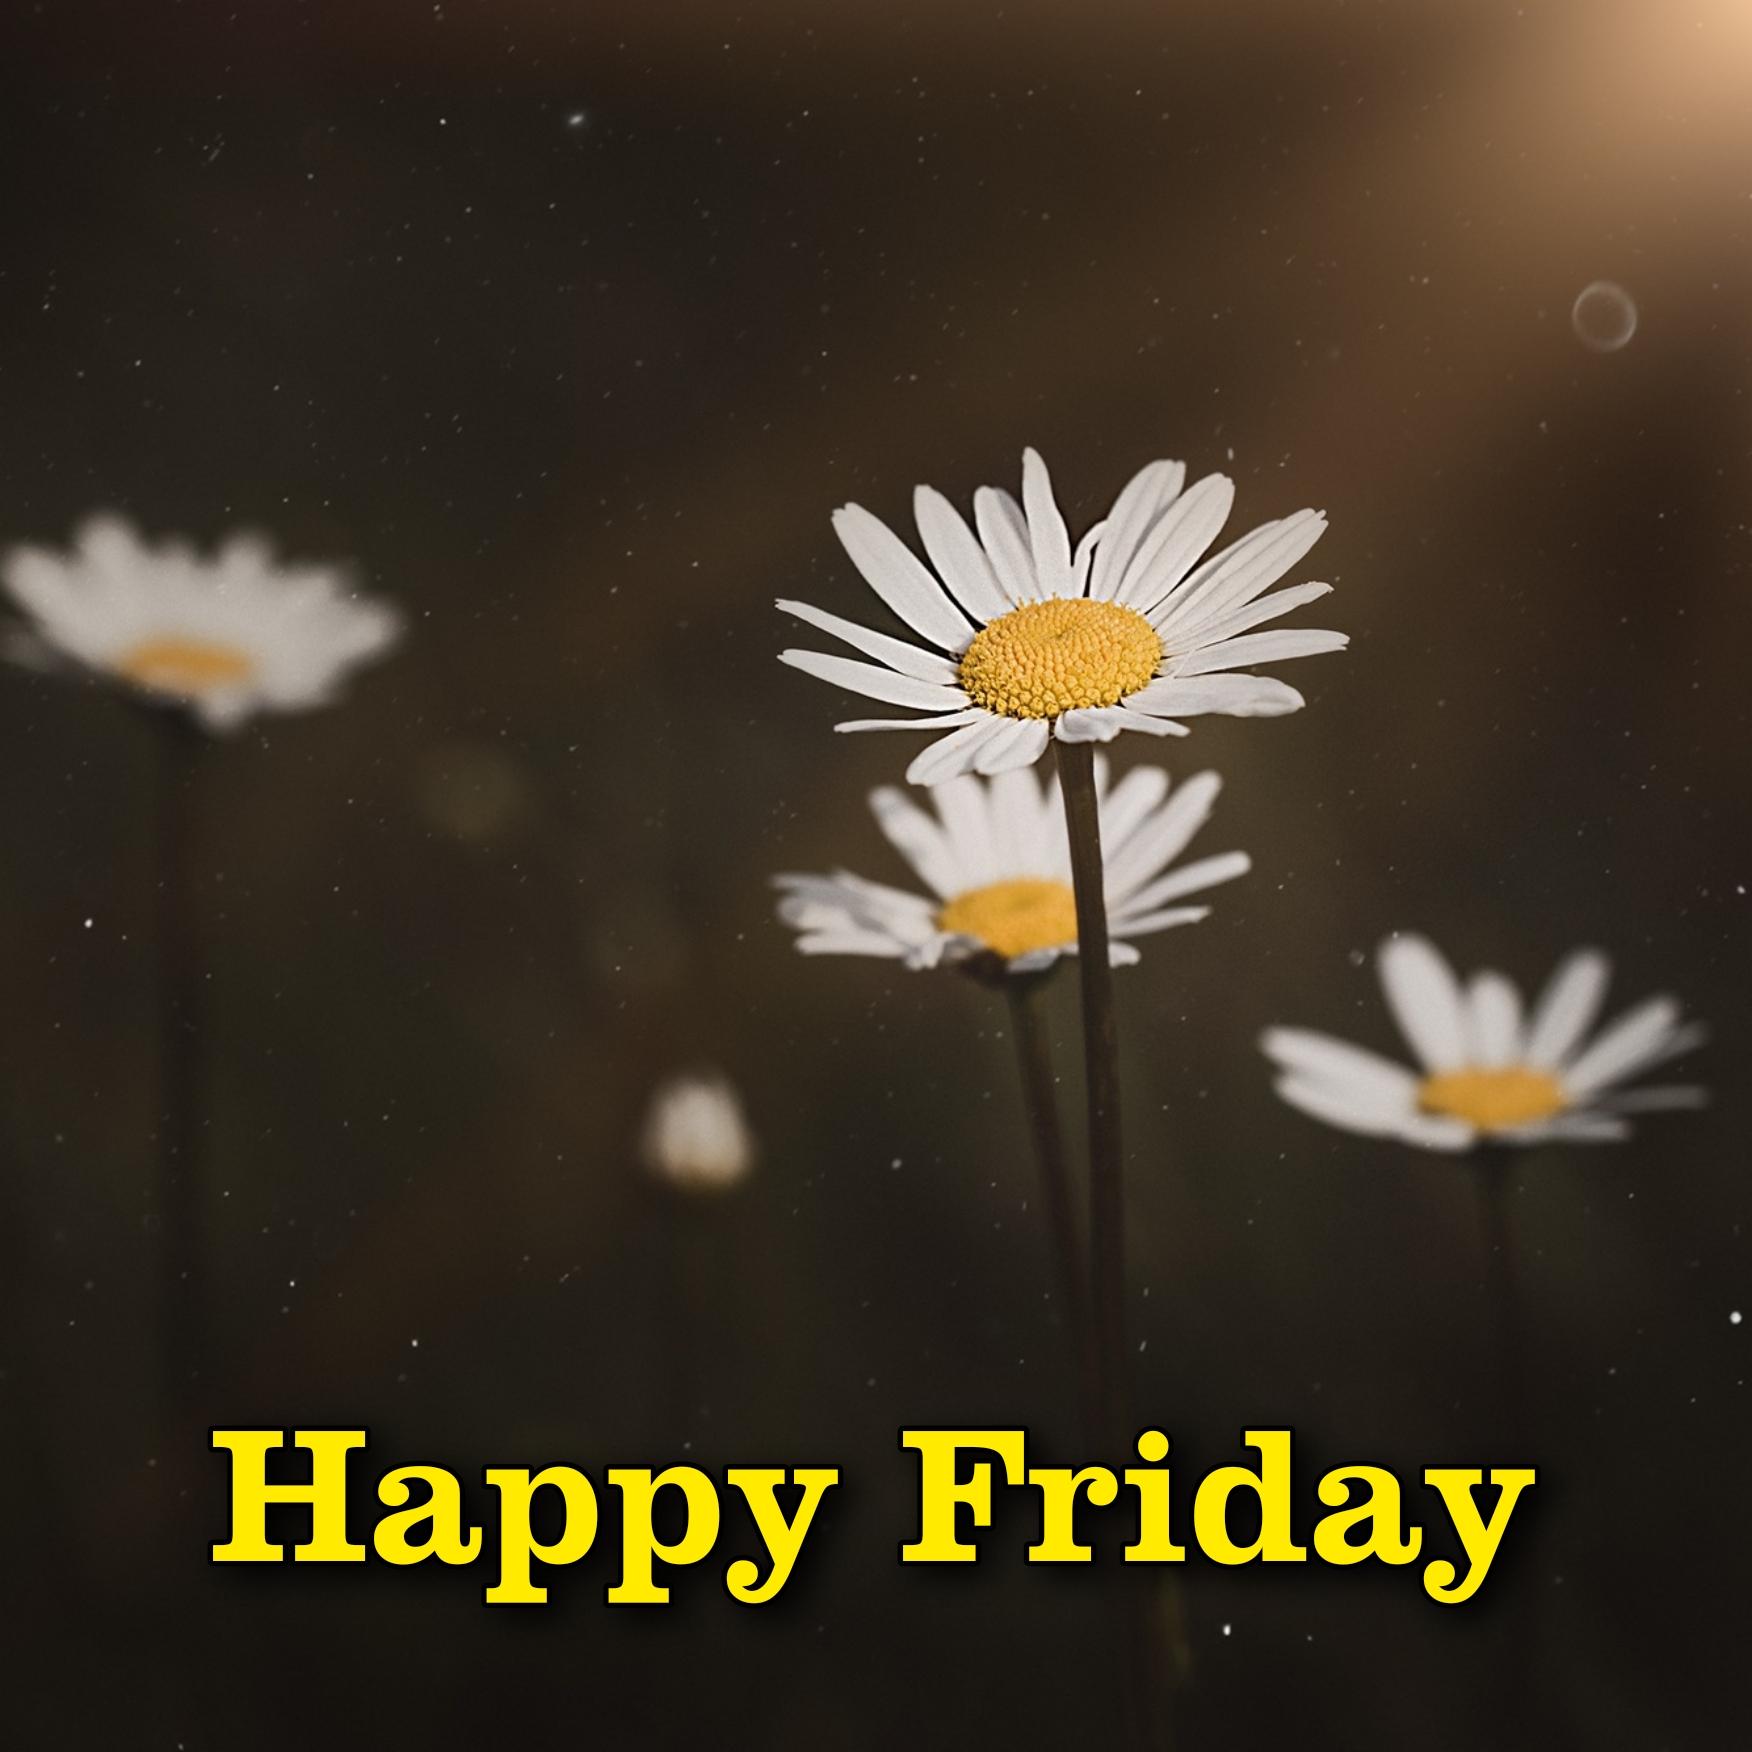 Happy Friday Images for Whatsapp